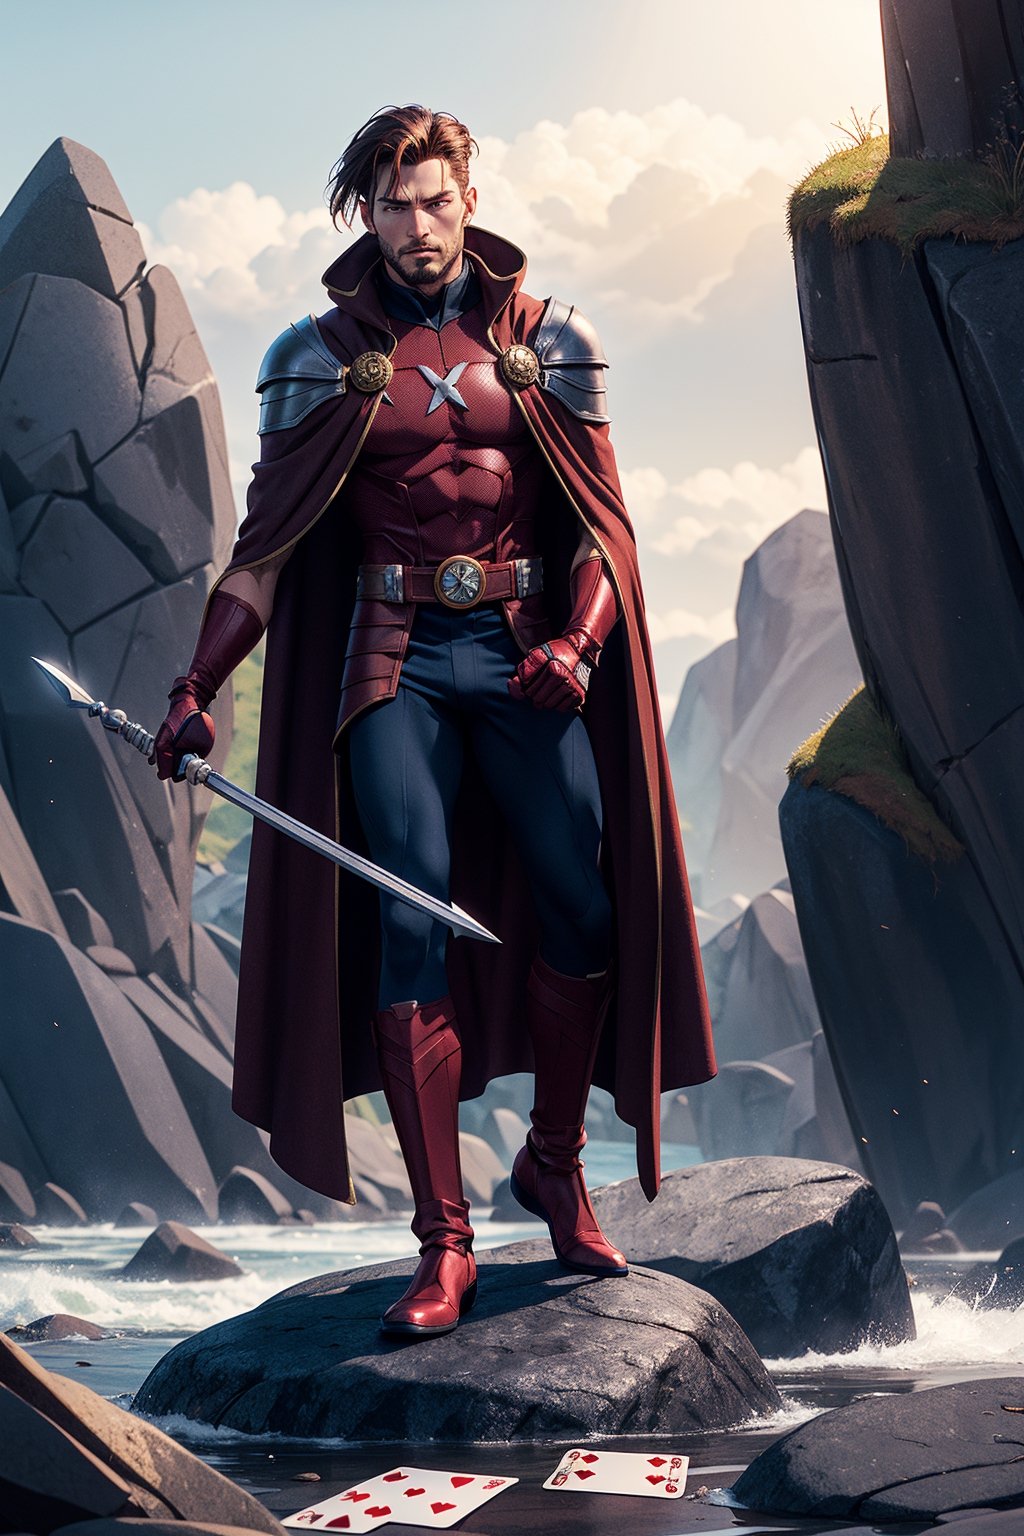 gambit from x-men stands on a rock, his cloak blowing in the wind, in one hand he holds his staff, in the other hand he holds a pair of playing cards, insertNameHere